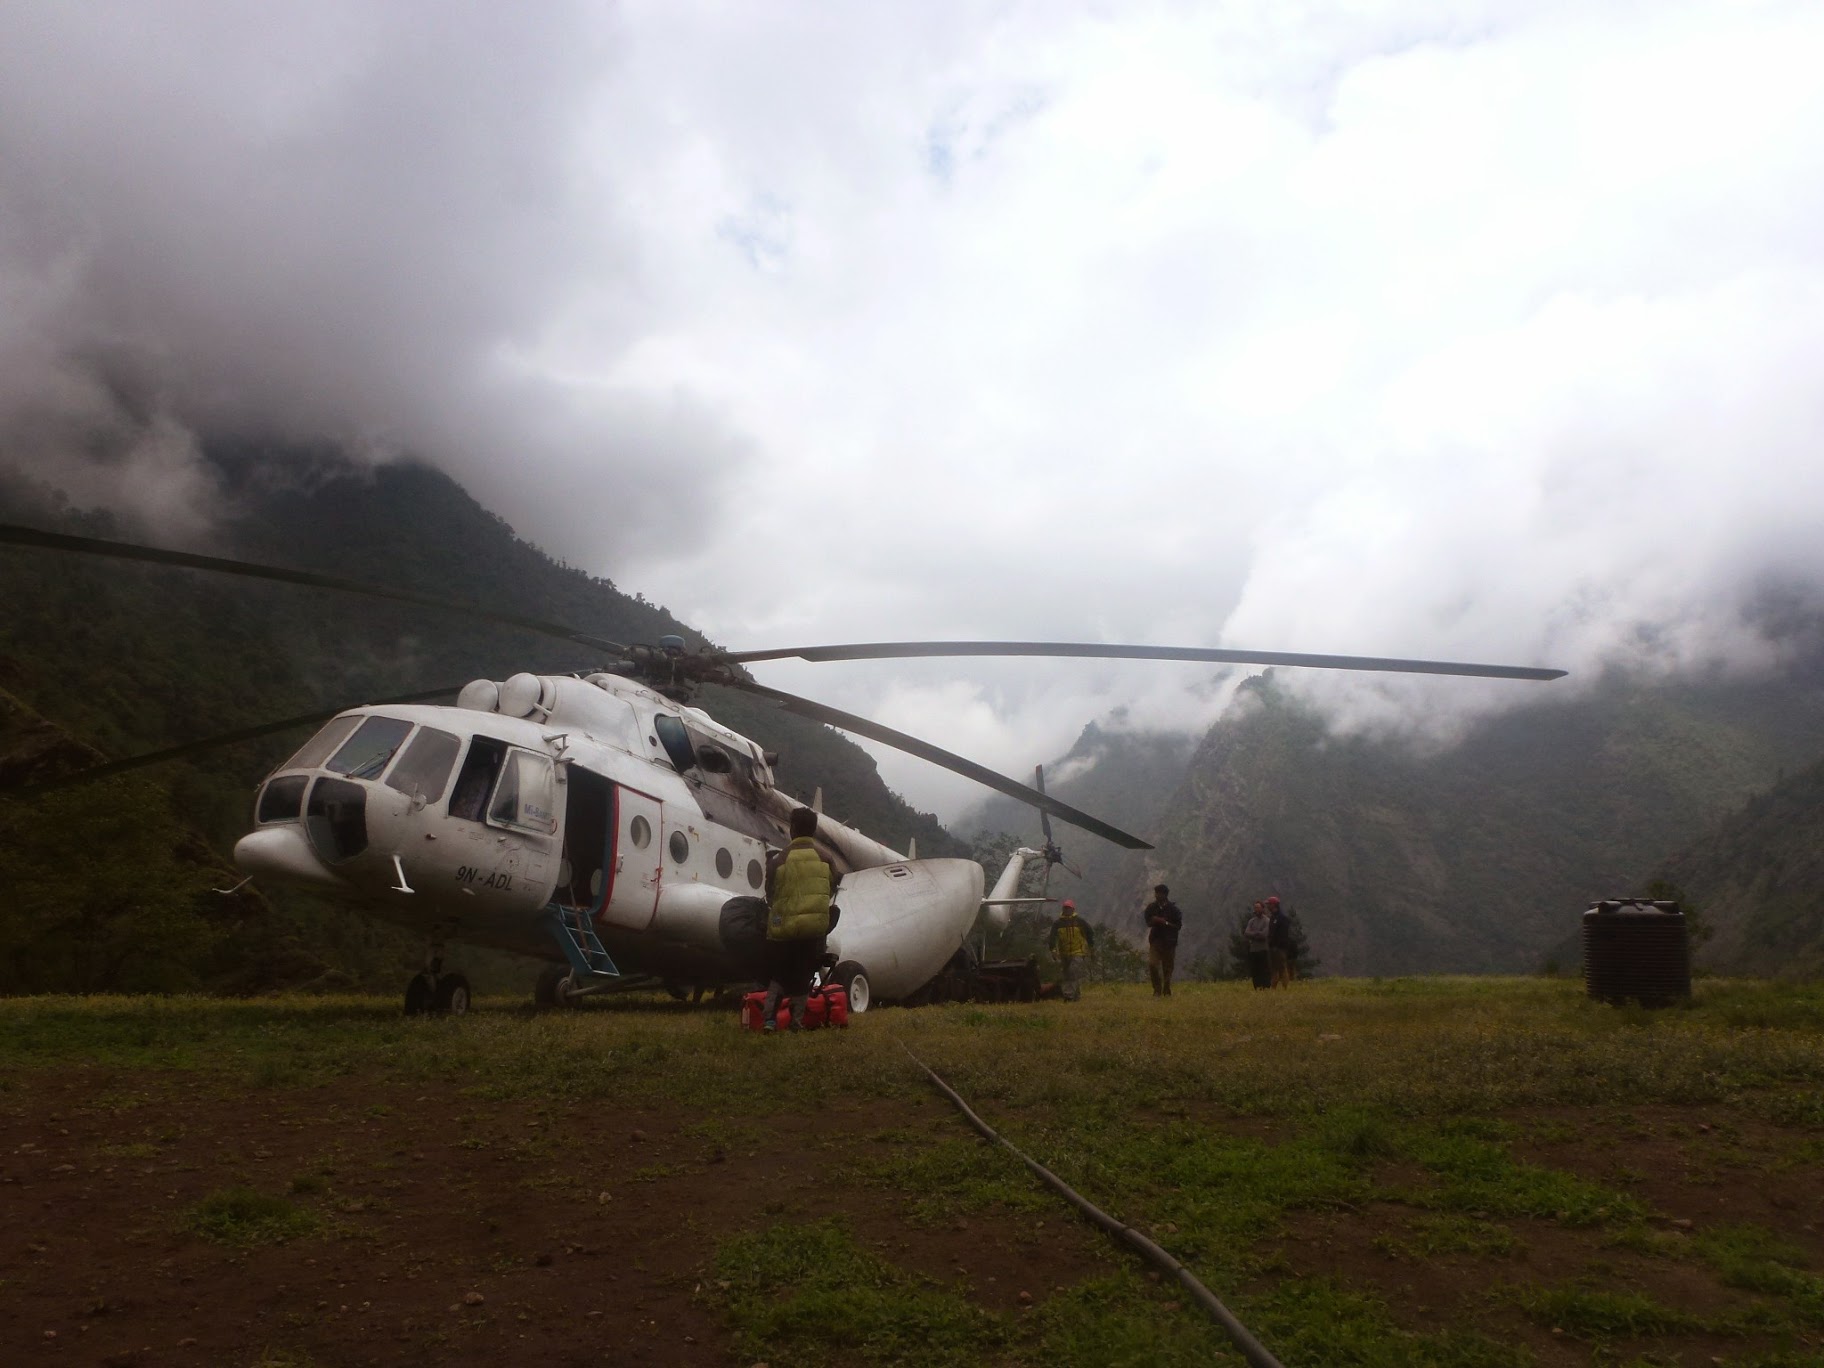 Taking a ride in a Mil MI-8 helicopter flying back to Kathmandu from Lukla. Escaping an early monsoon arrival after a month of trekking and climbing in the Khumbu valley of Nepal.